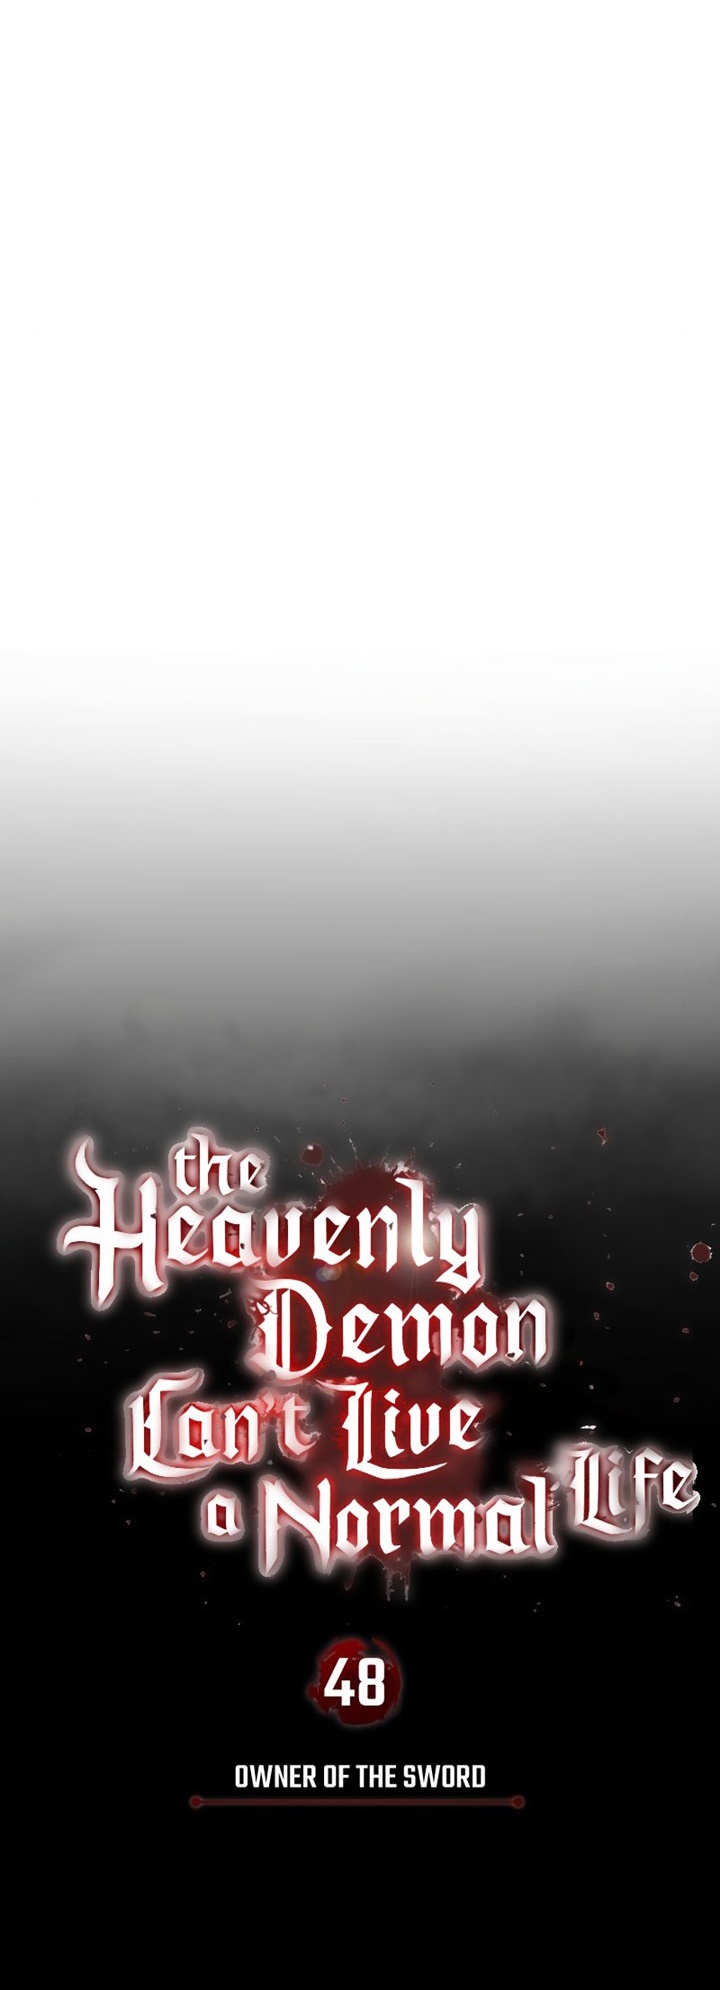 The Heavenly Demon Can’t Live a Normal Life 48 (32)